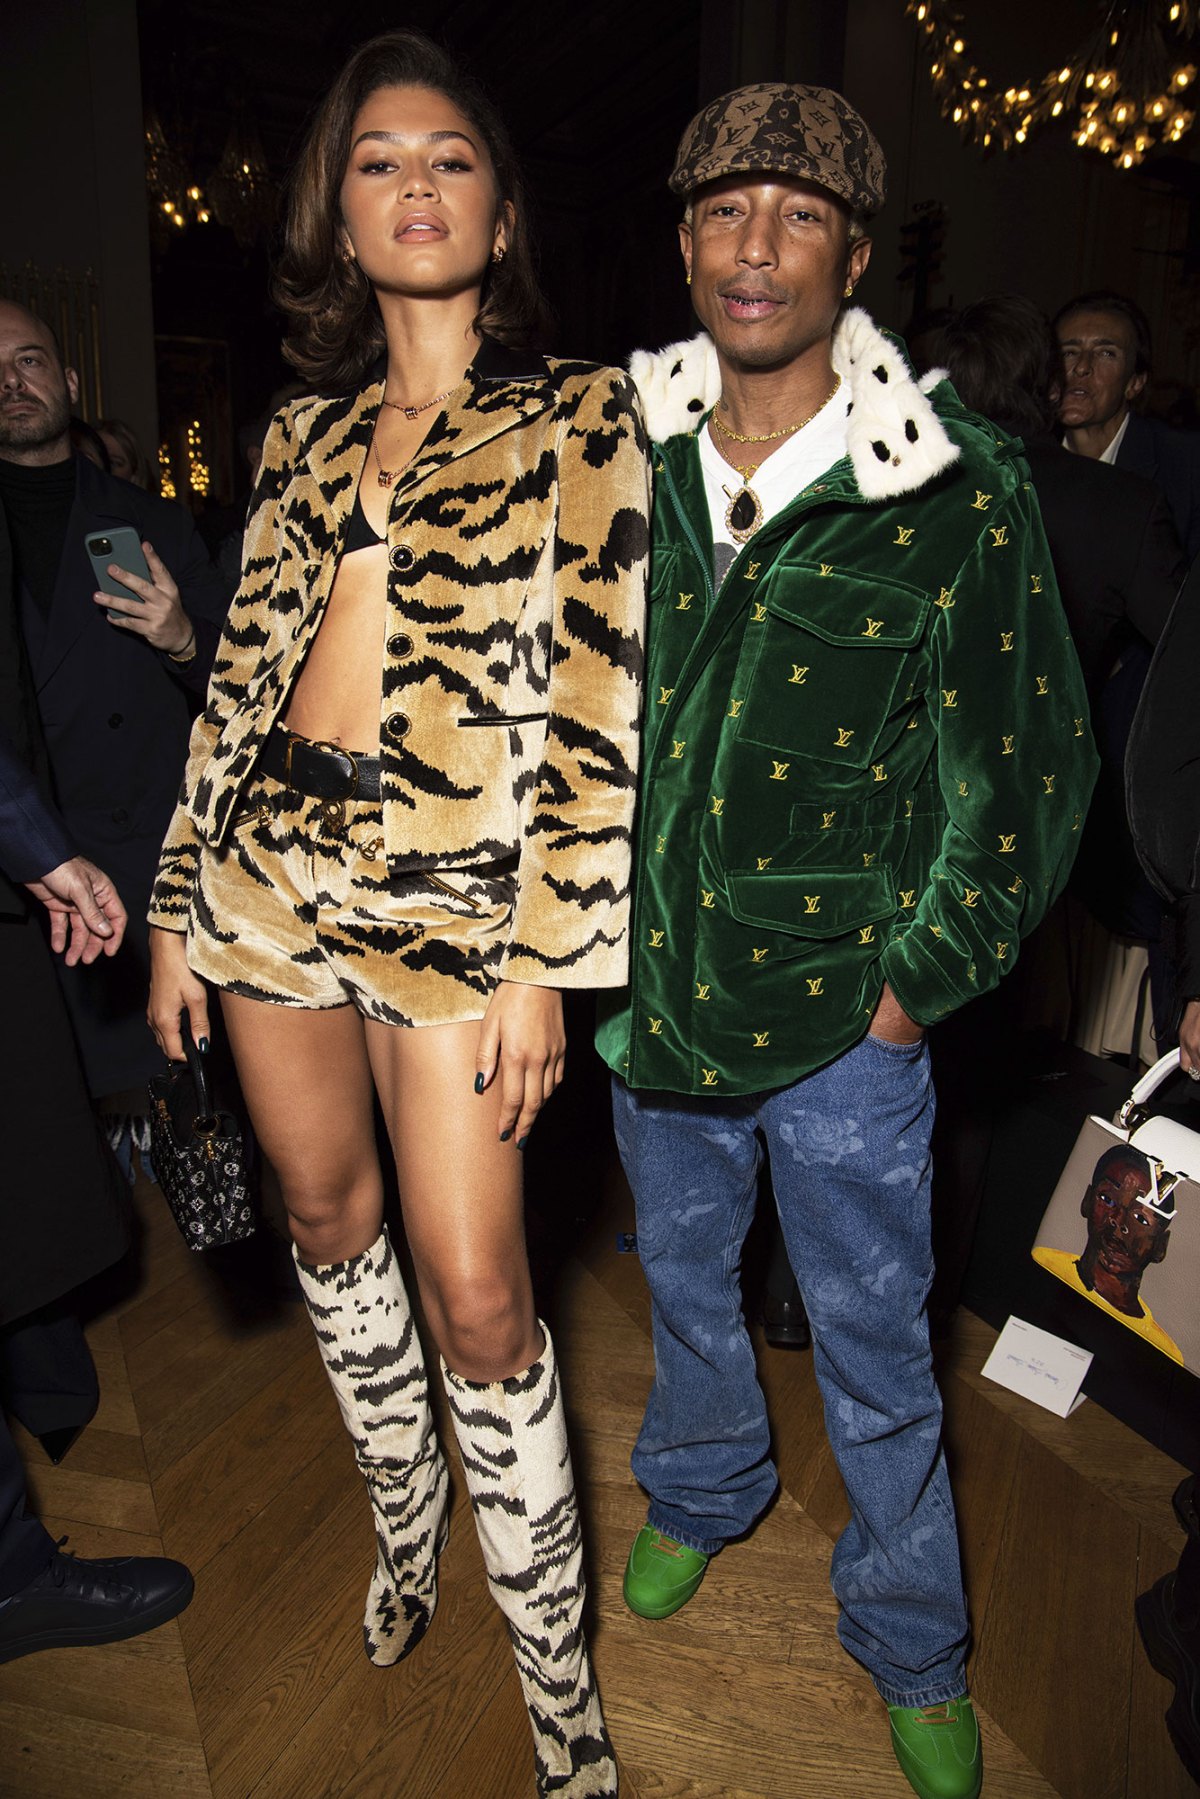 Zendaya Takes A Walk On The Wild Side In A Tiger-Print Suit At